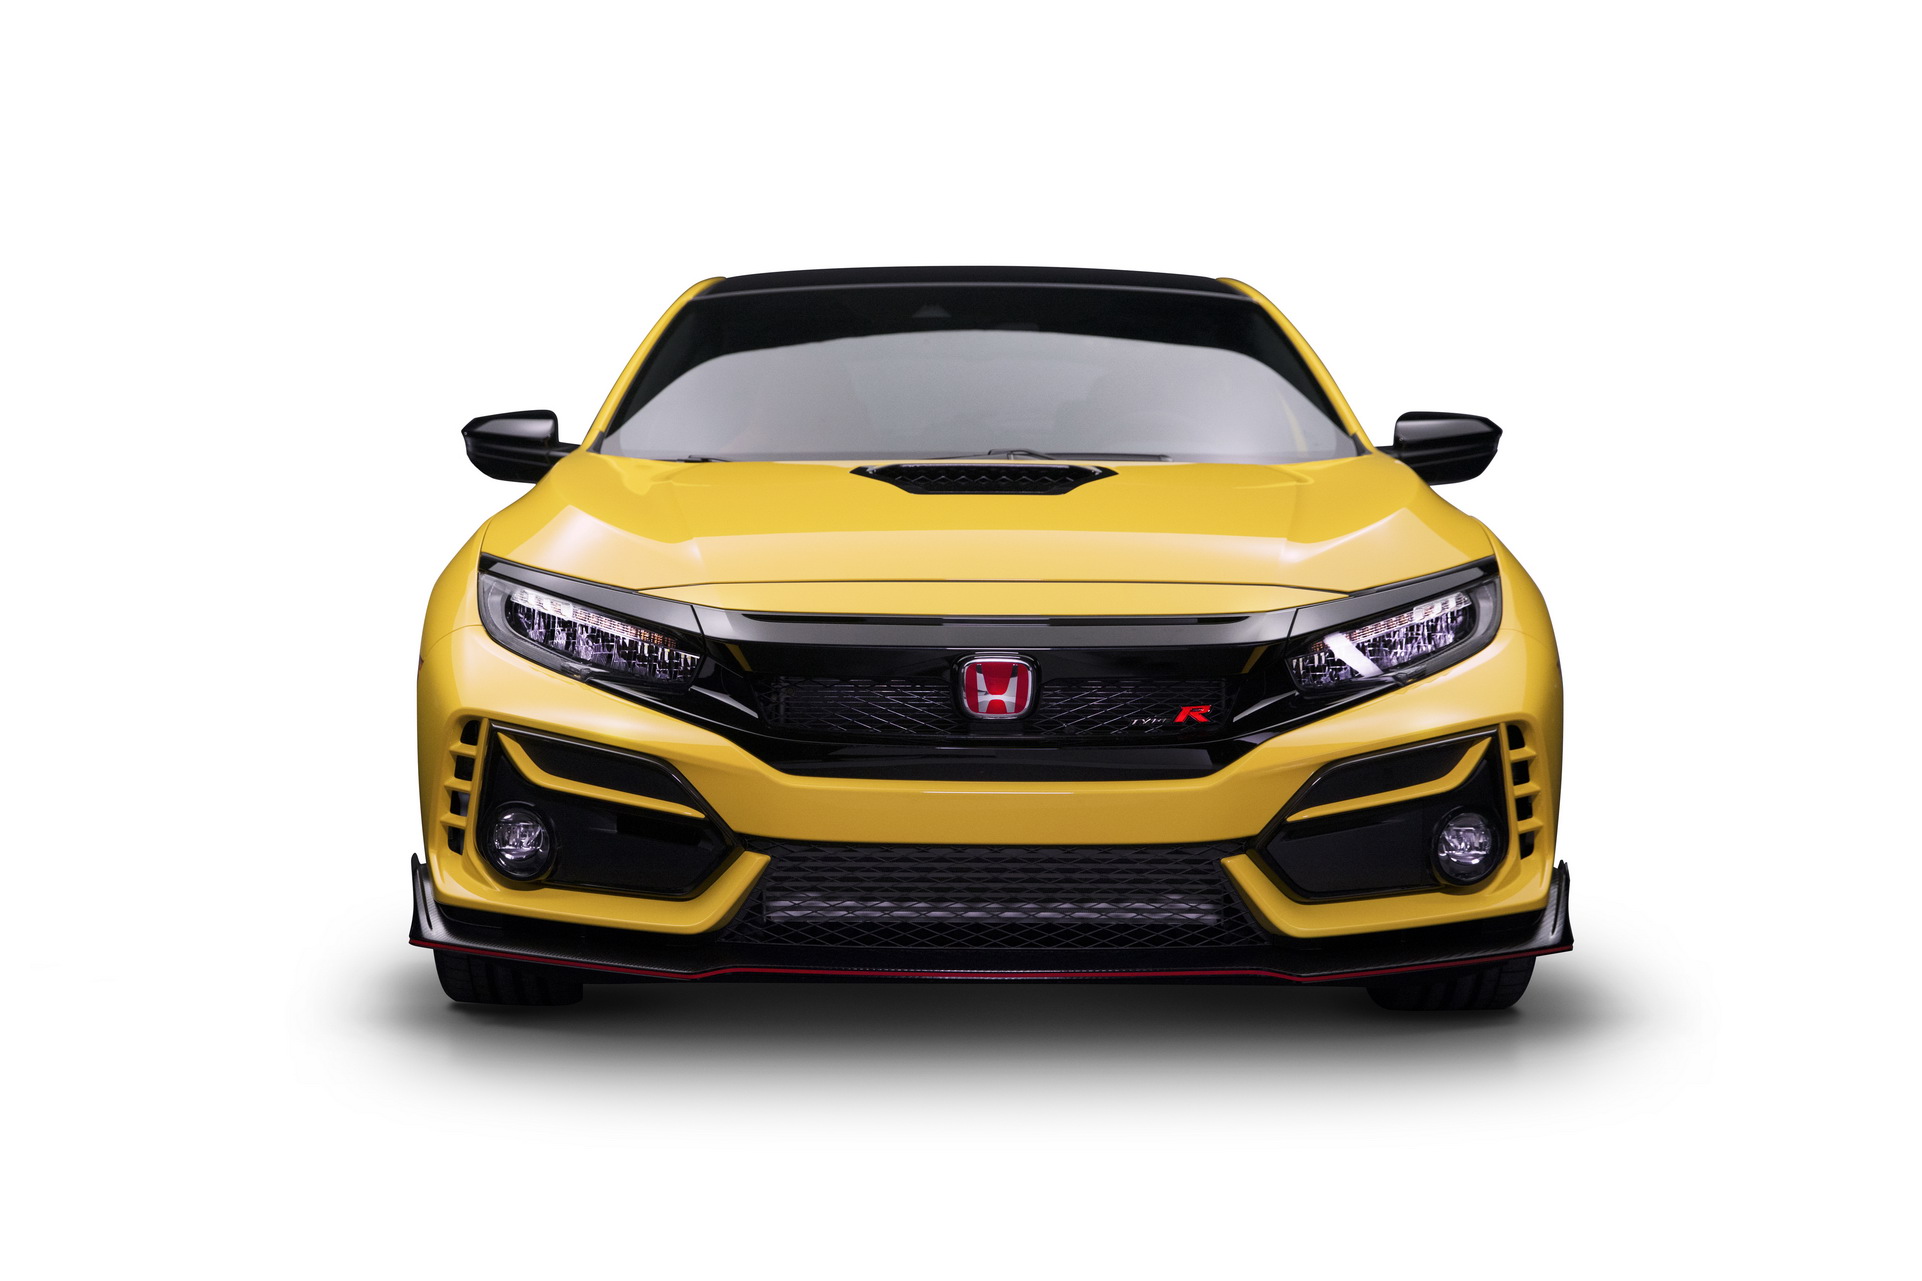 Lighter 2021 Honda Civic Type R Limited Edition Promises To Be Ultimate Track Edition Of The Series Carscoops